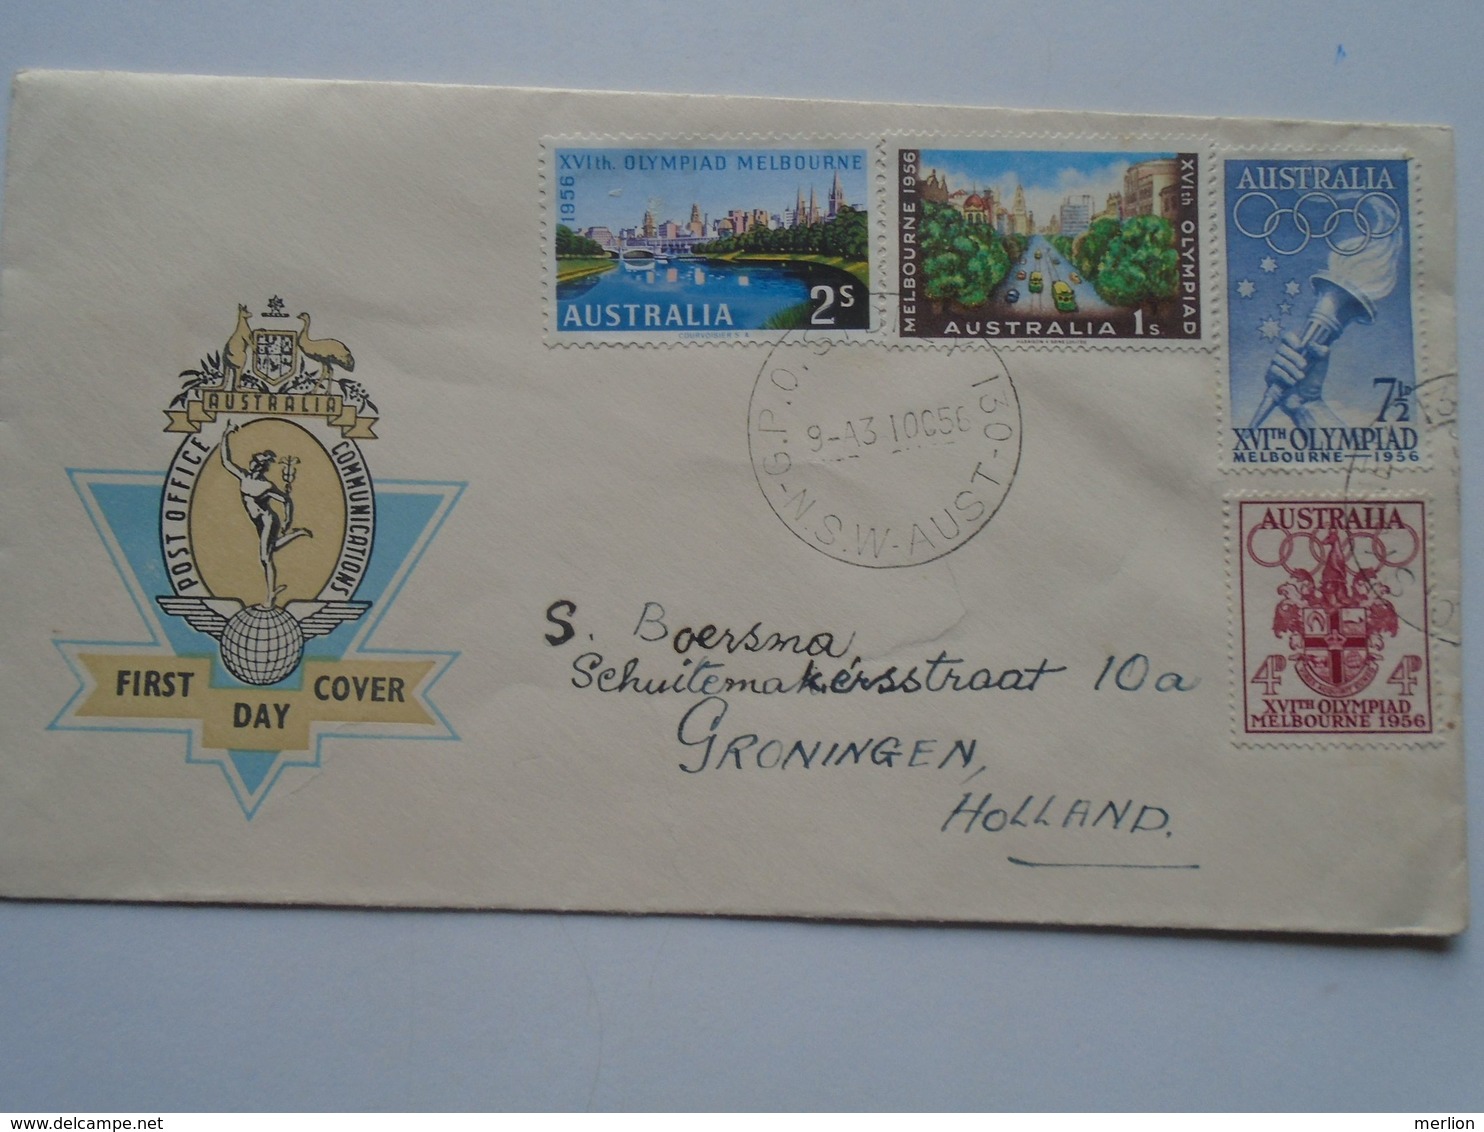 ZA249.23  Australia  Cover FDC Post Office Communications - Olympia Melbourne Stamps  1956 - Zomer 1956: Melbourne